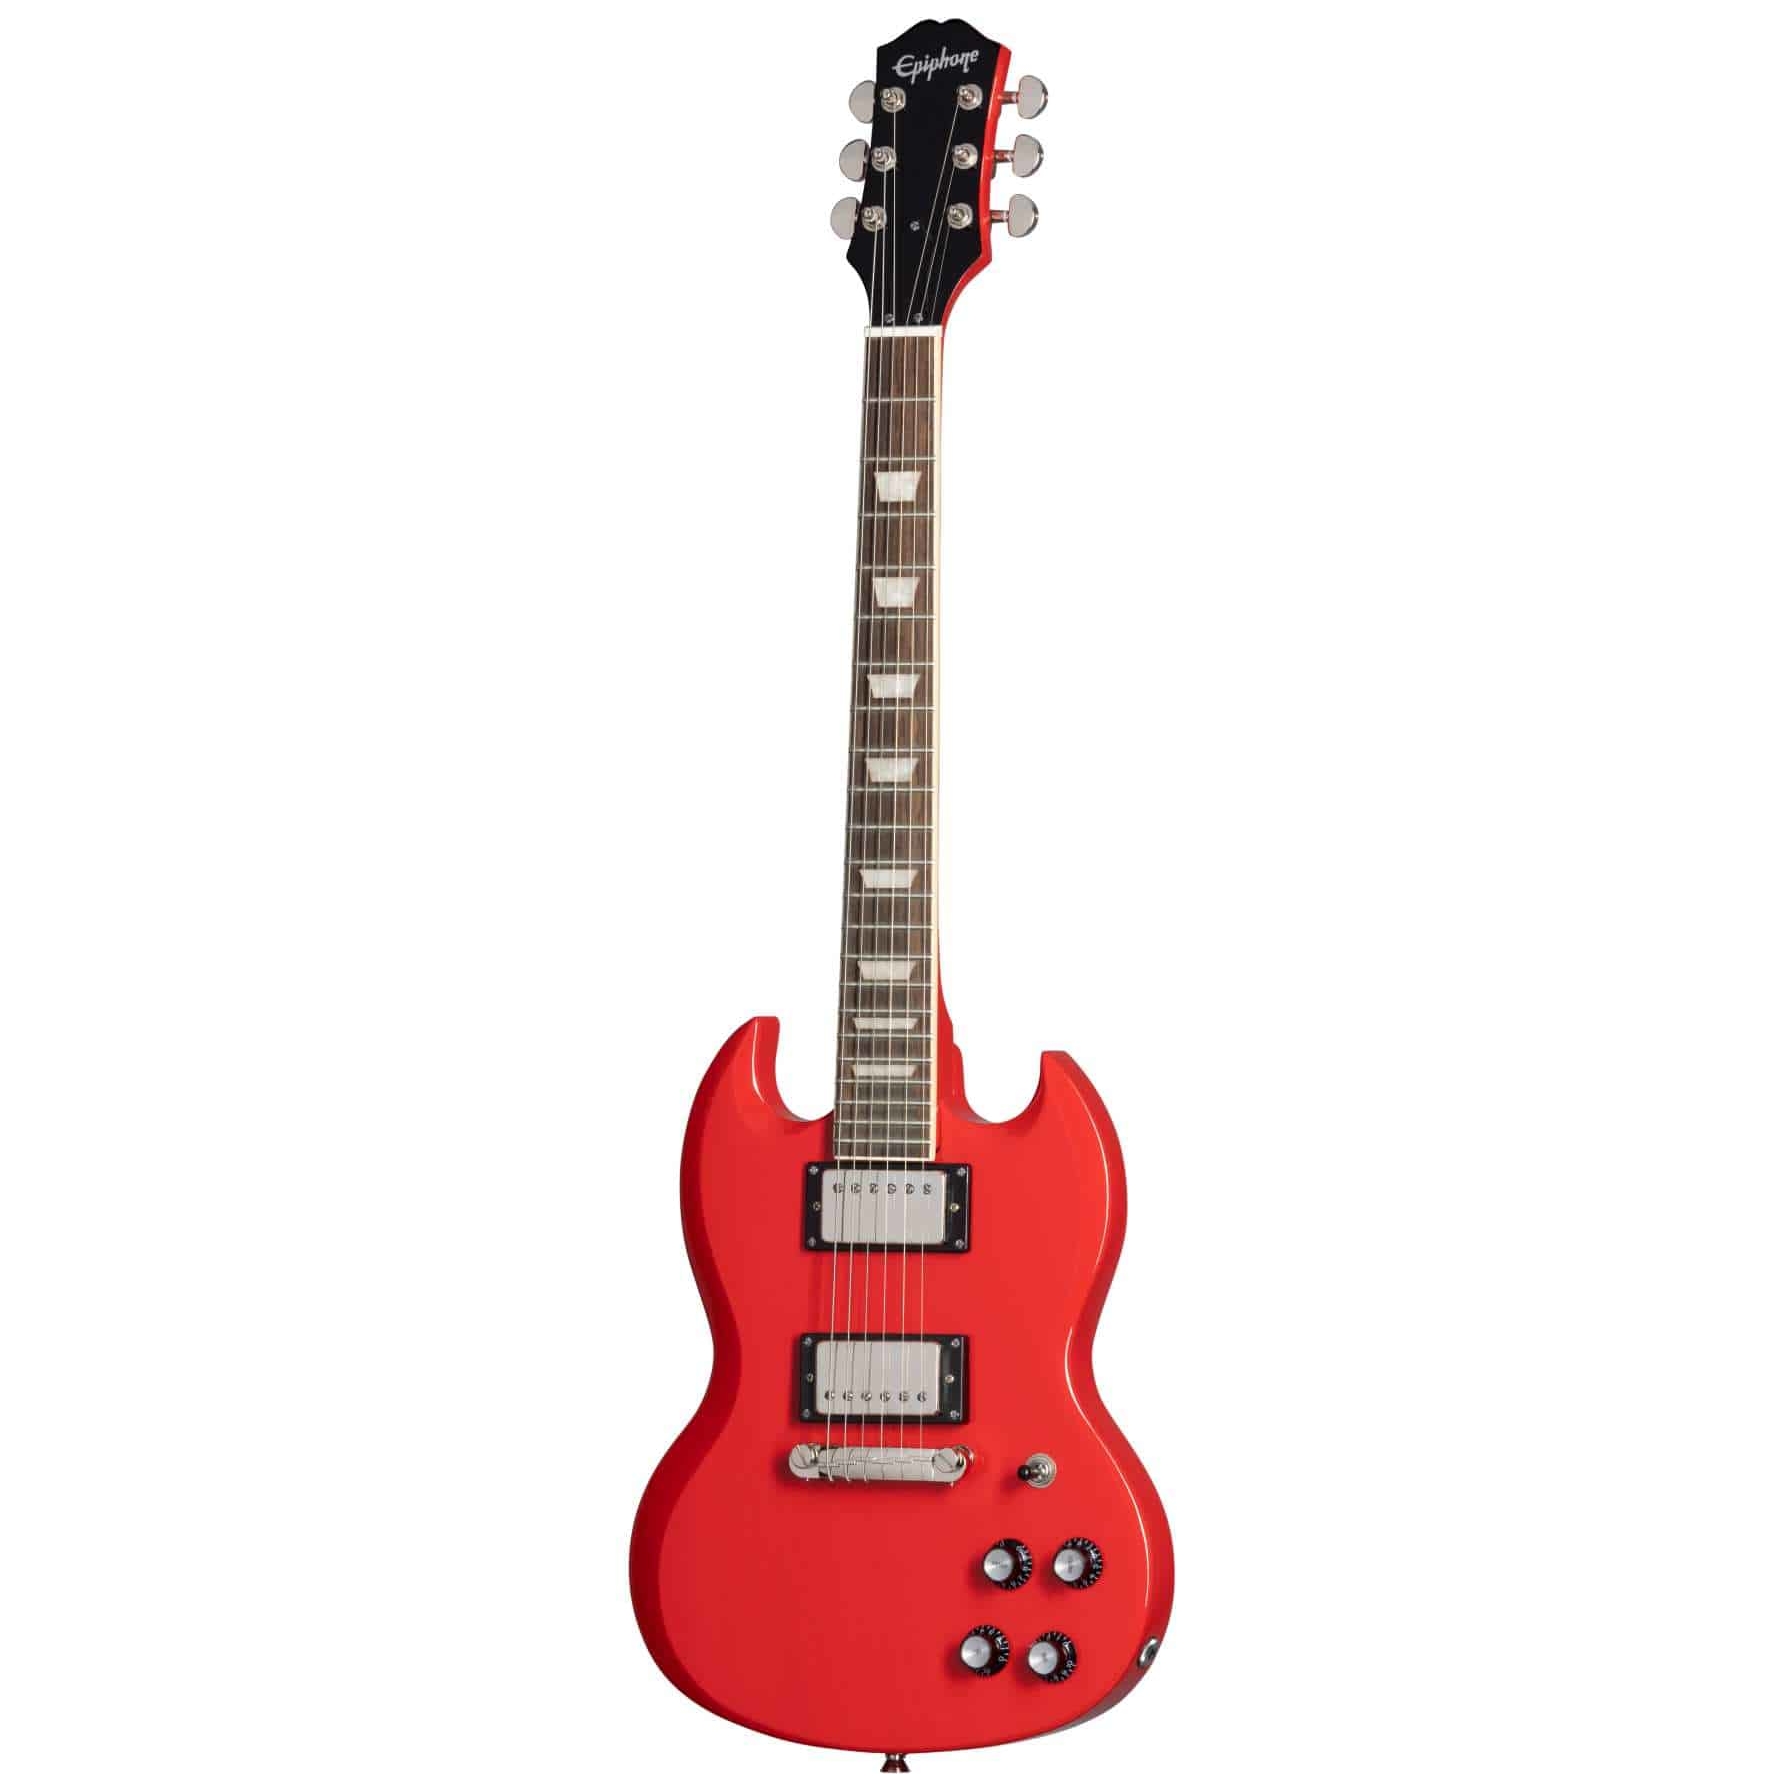 Epiphone Power Players SG - Lava Red